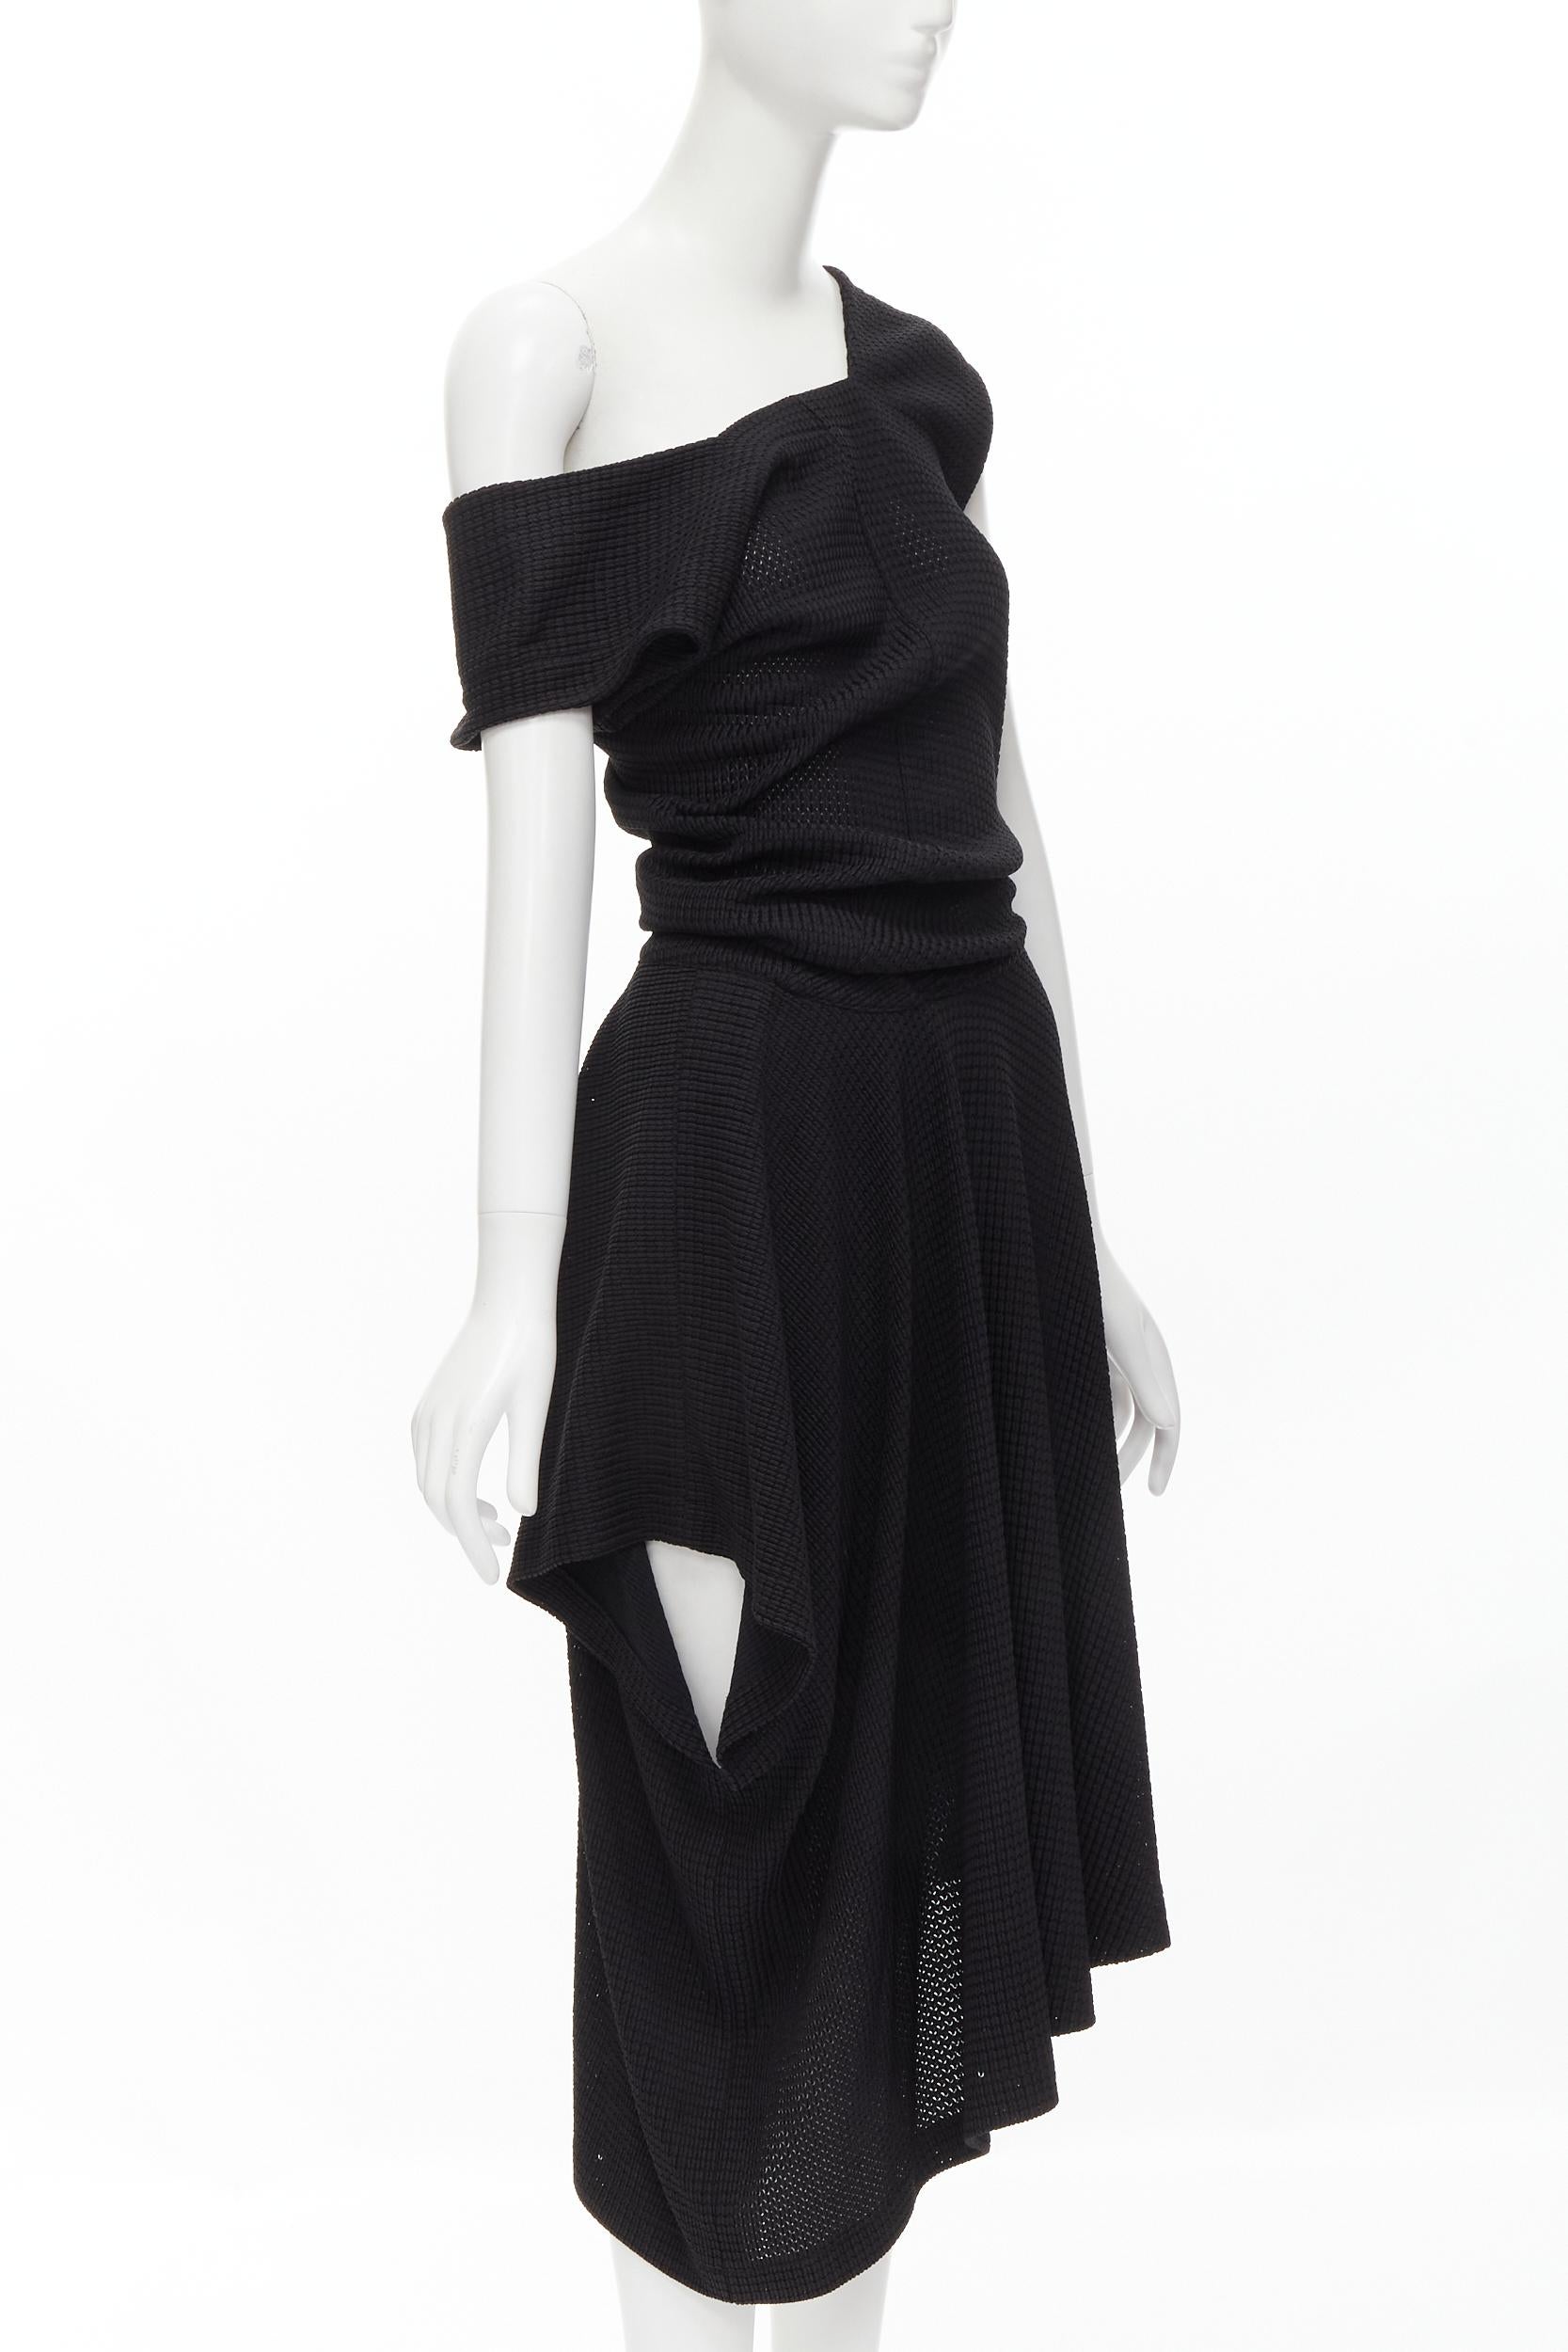 COMME DES GARCONS Vintage 1980s acetate nylon draped handkerchief dress M In Excellent Condition For Sale In Hong Kong, NT